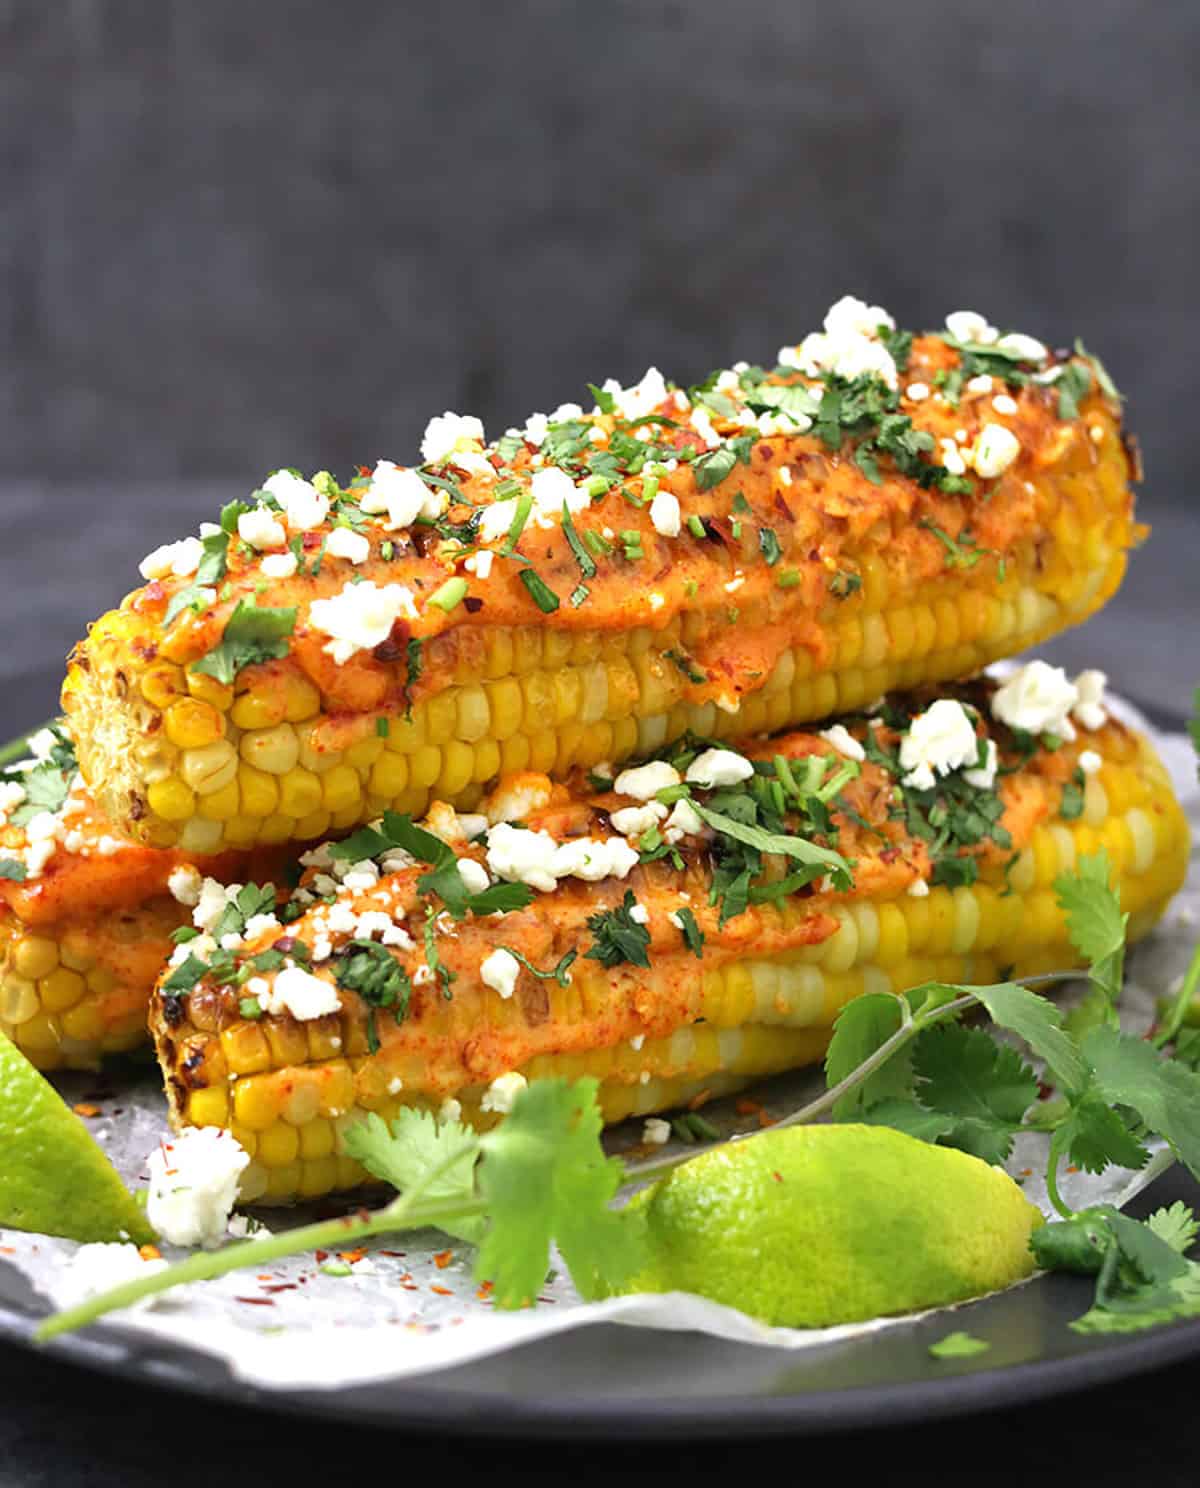 Front view of mexican-style corn on the cob served with a drizzle of spicy mayo, cojita cheese, and red pepper flakes.